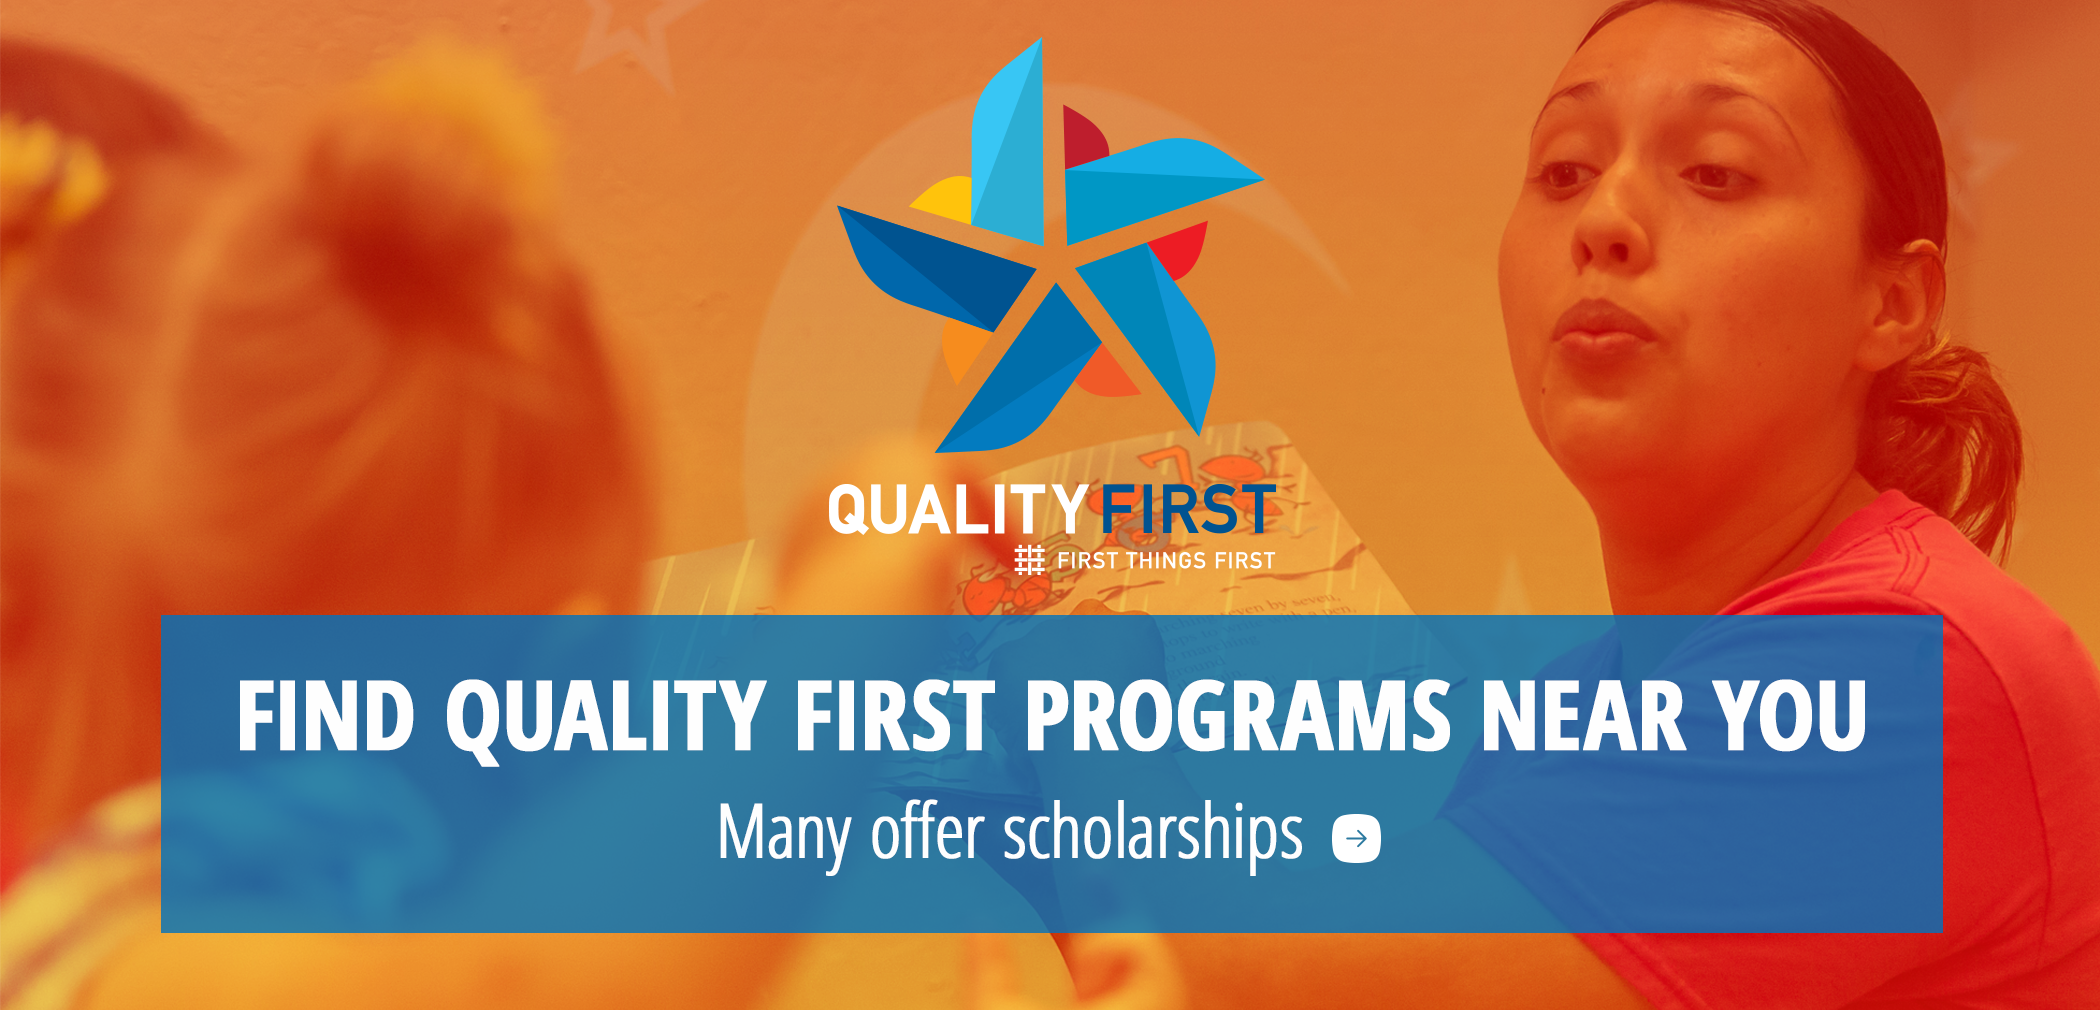 Find Quality First Programs Near You